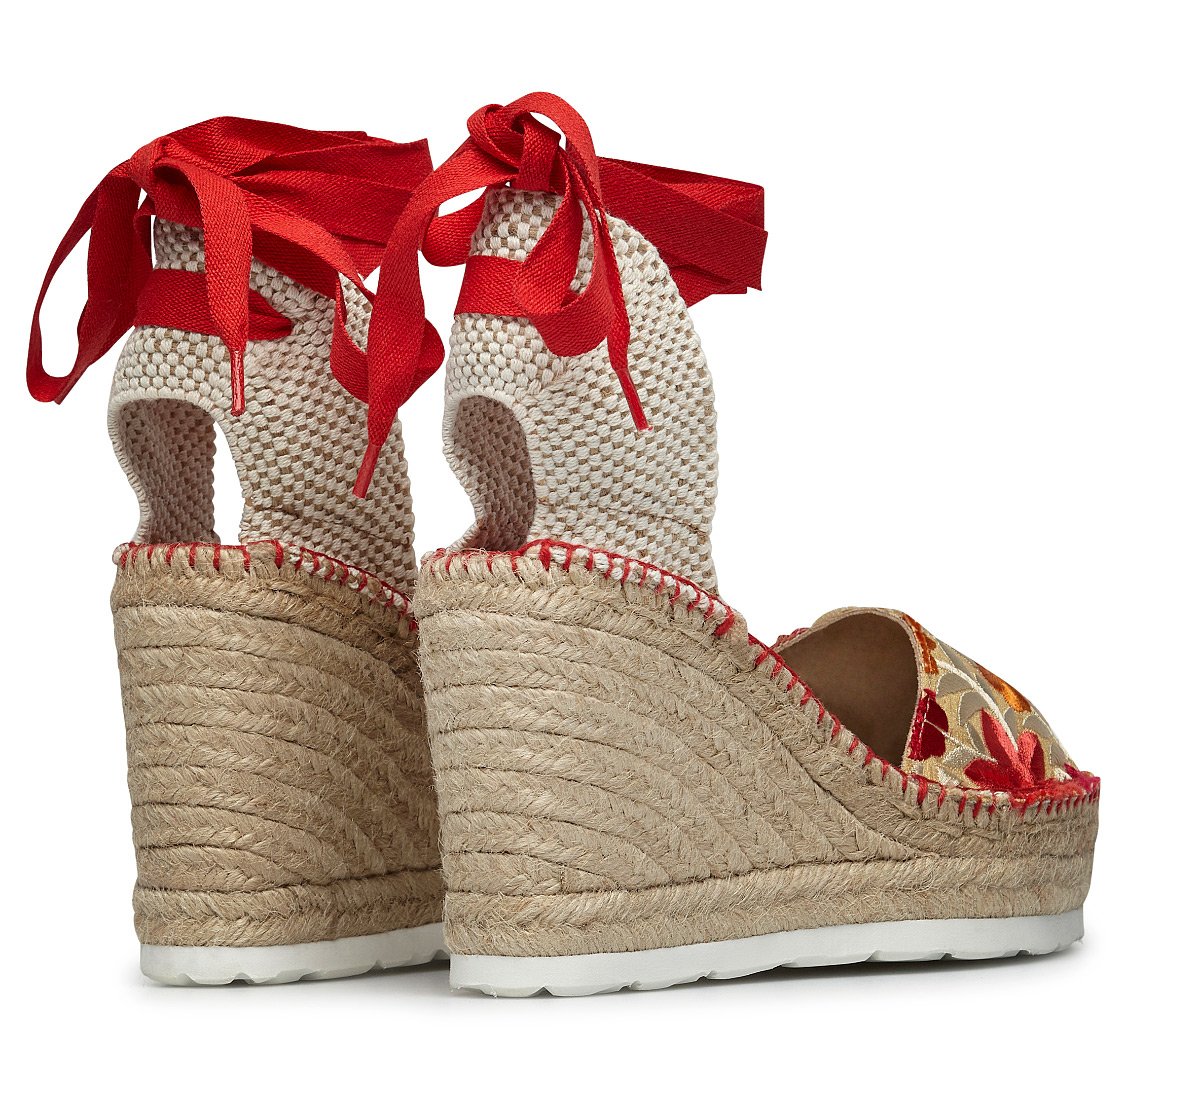 Espadrilles with wedge and floral print